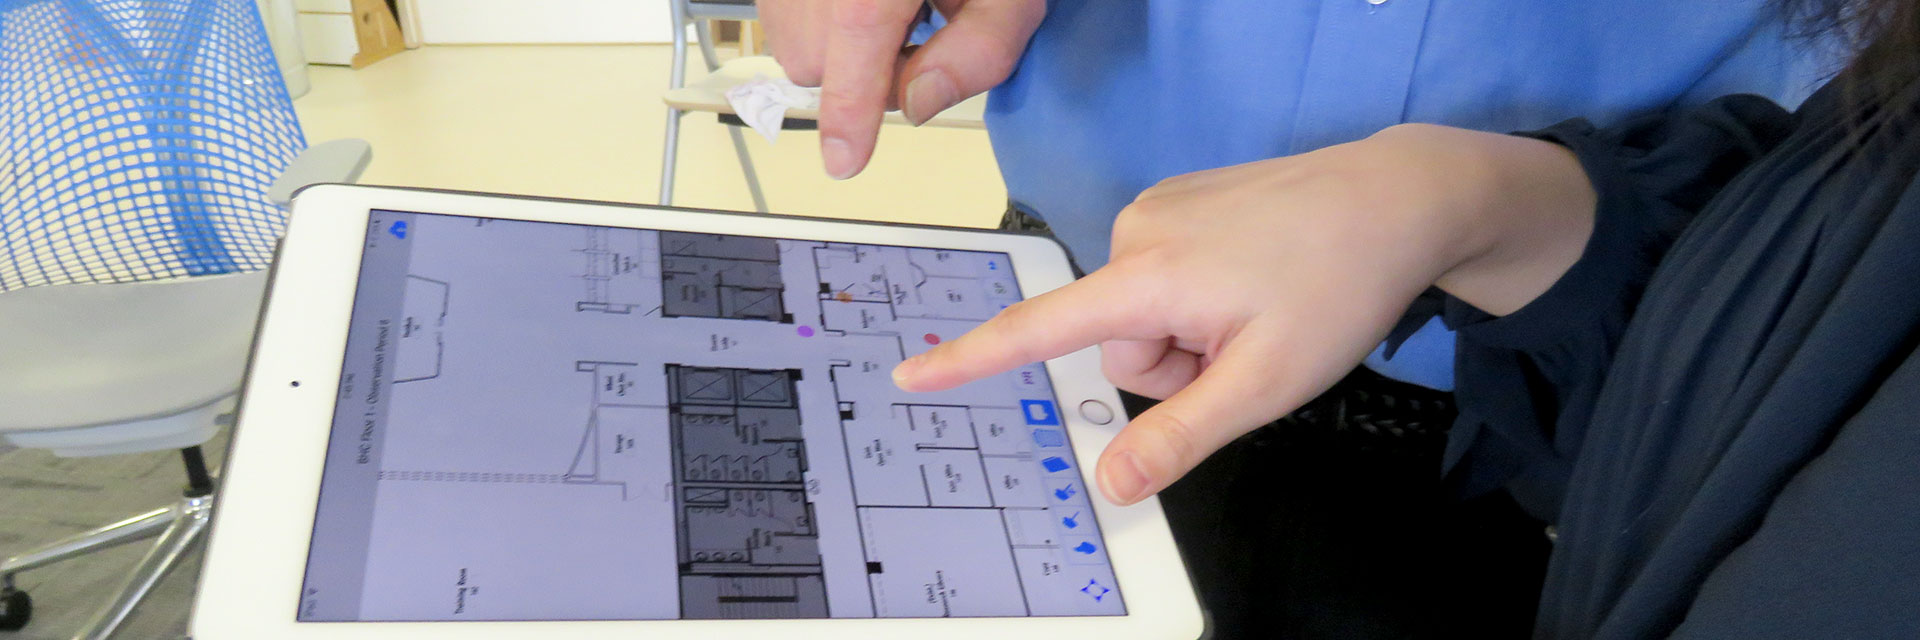 Researchers look at a floorplan on a laptop.